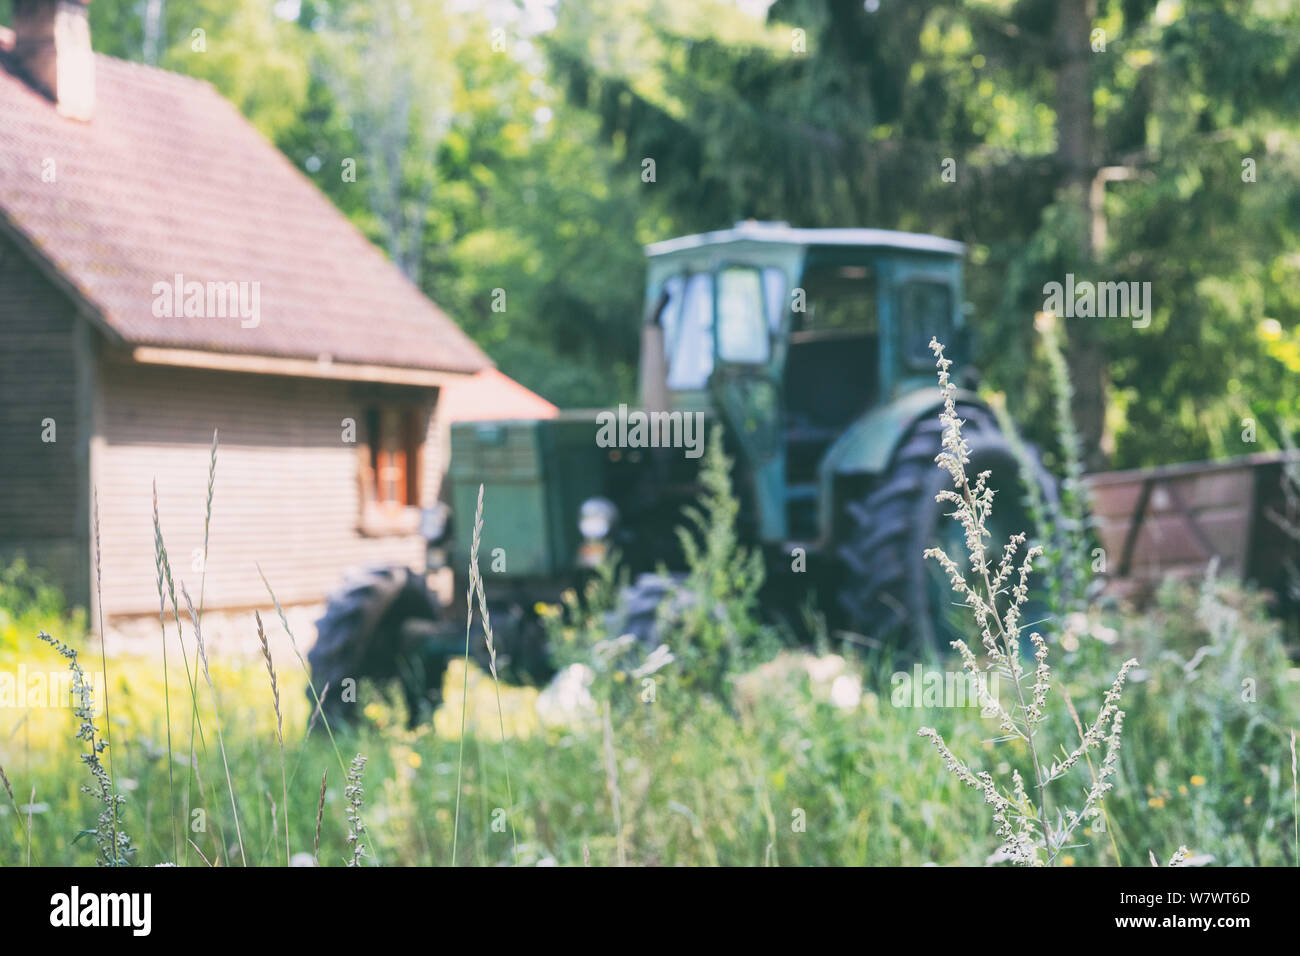 A tractor stands at a rural house Stock Photo